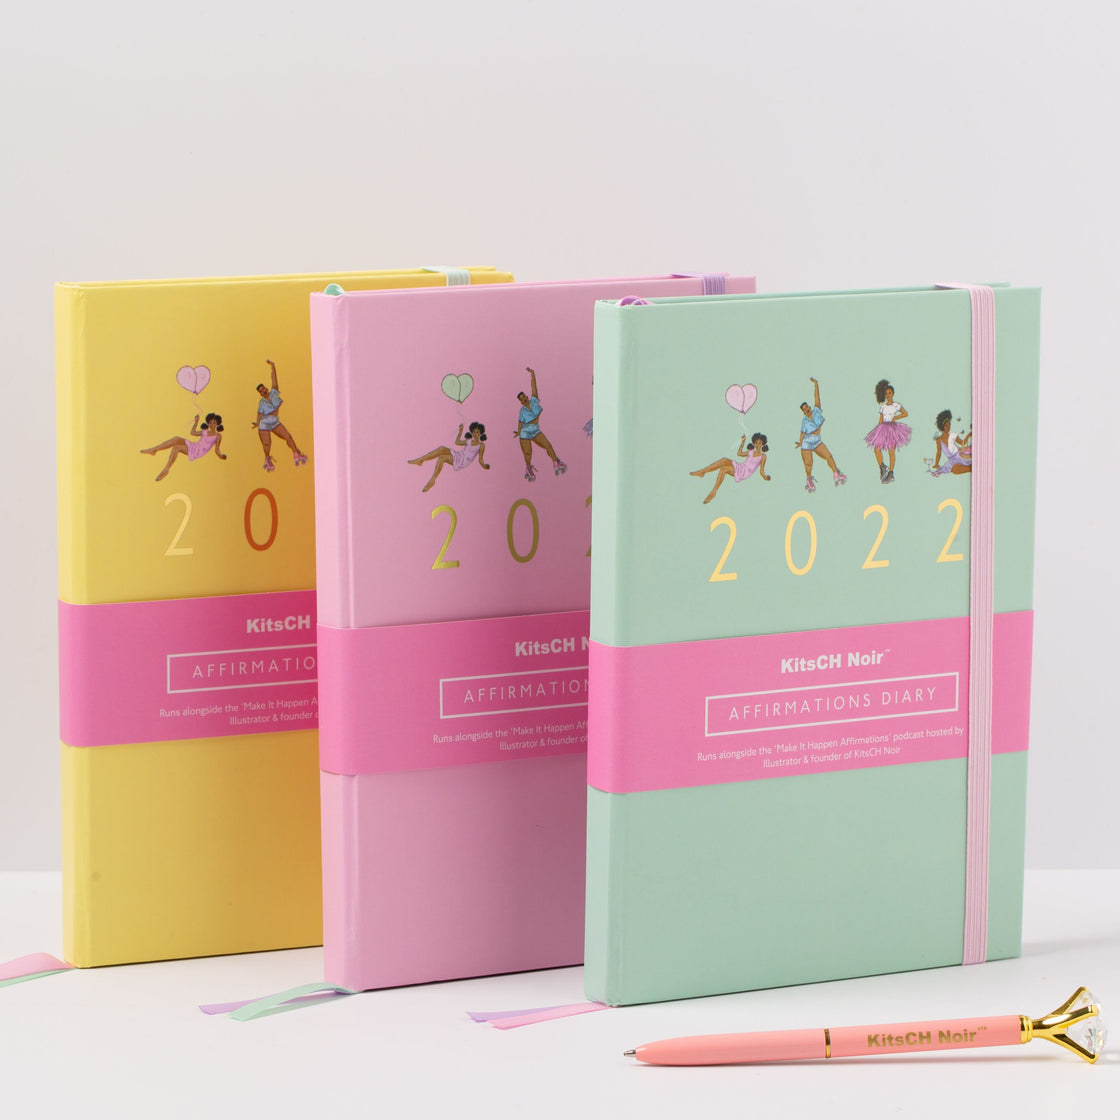 The affirmation diaries come in three colours – yellow, pink and mint green.